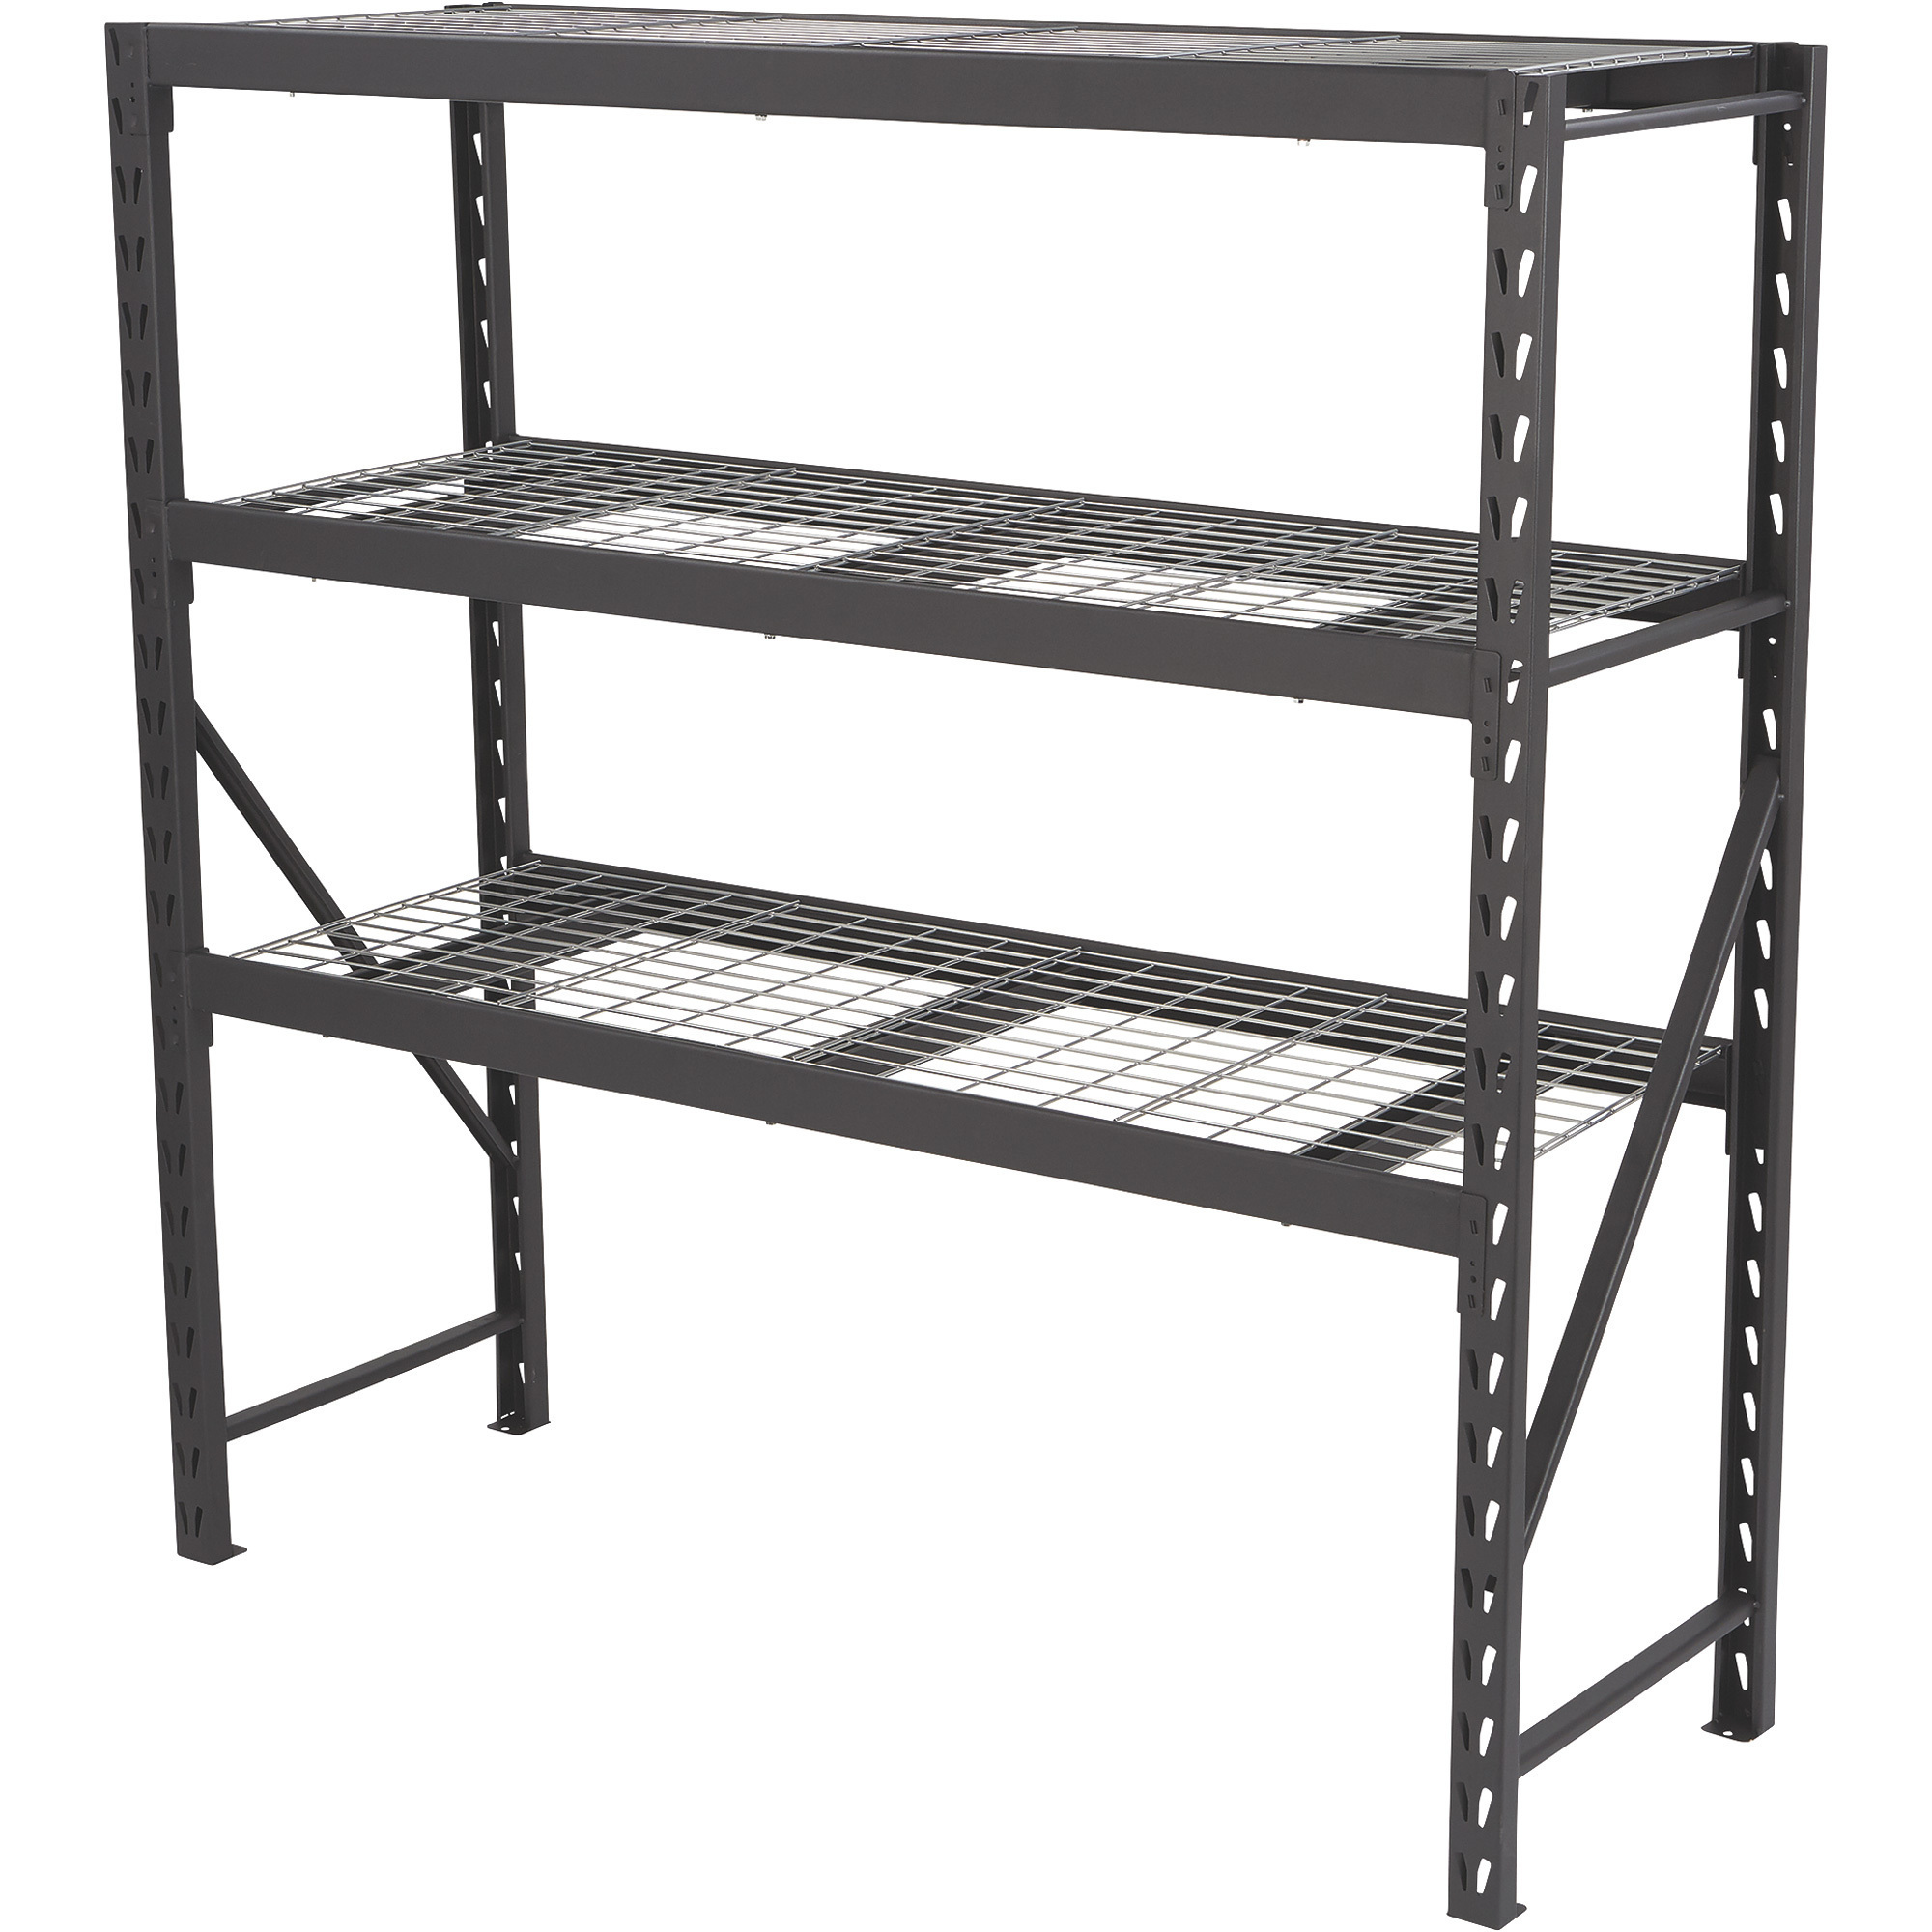 Ironton Industrial Steel Shelving, 72Inch W x 24Inch D x 72Inch H, 3 Shelves